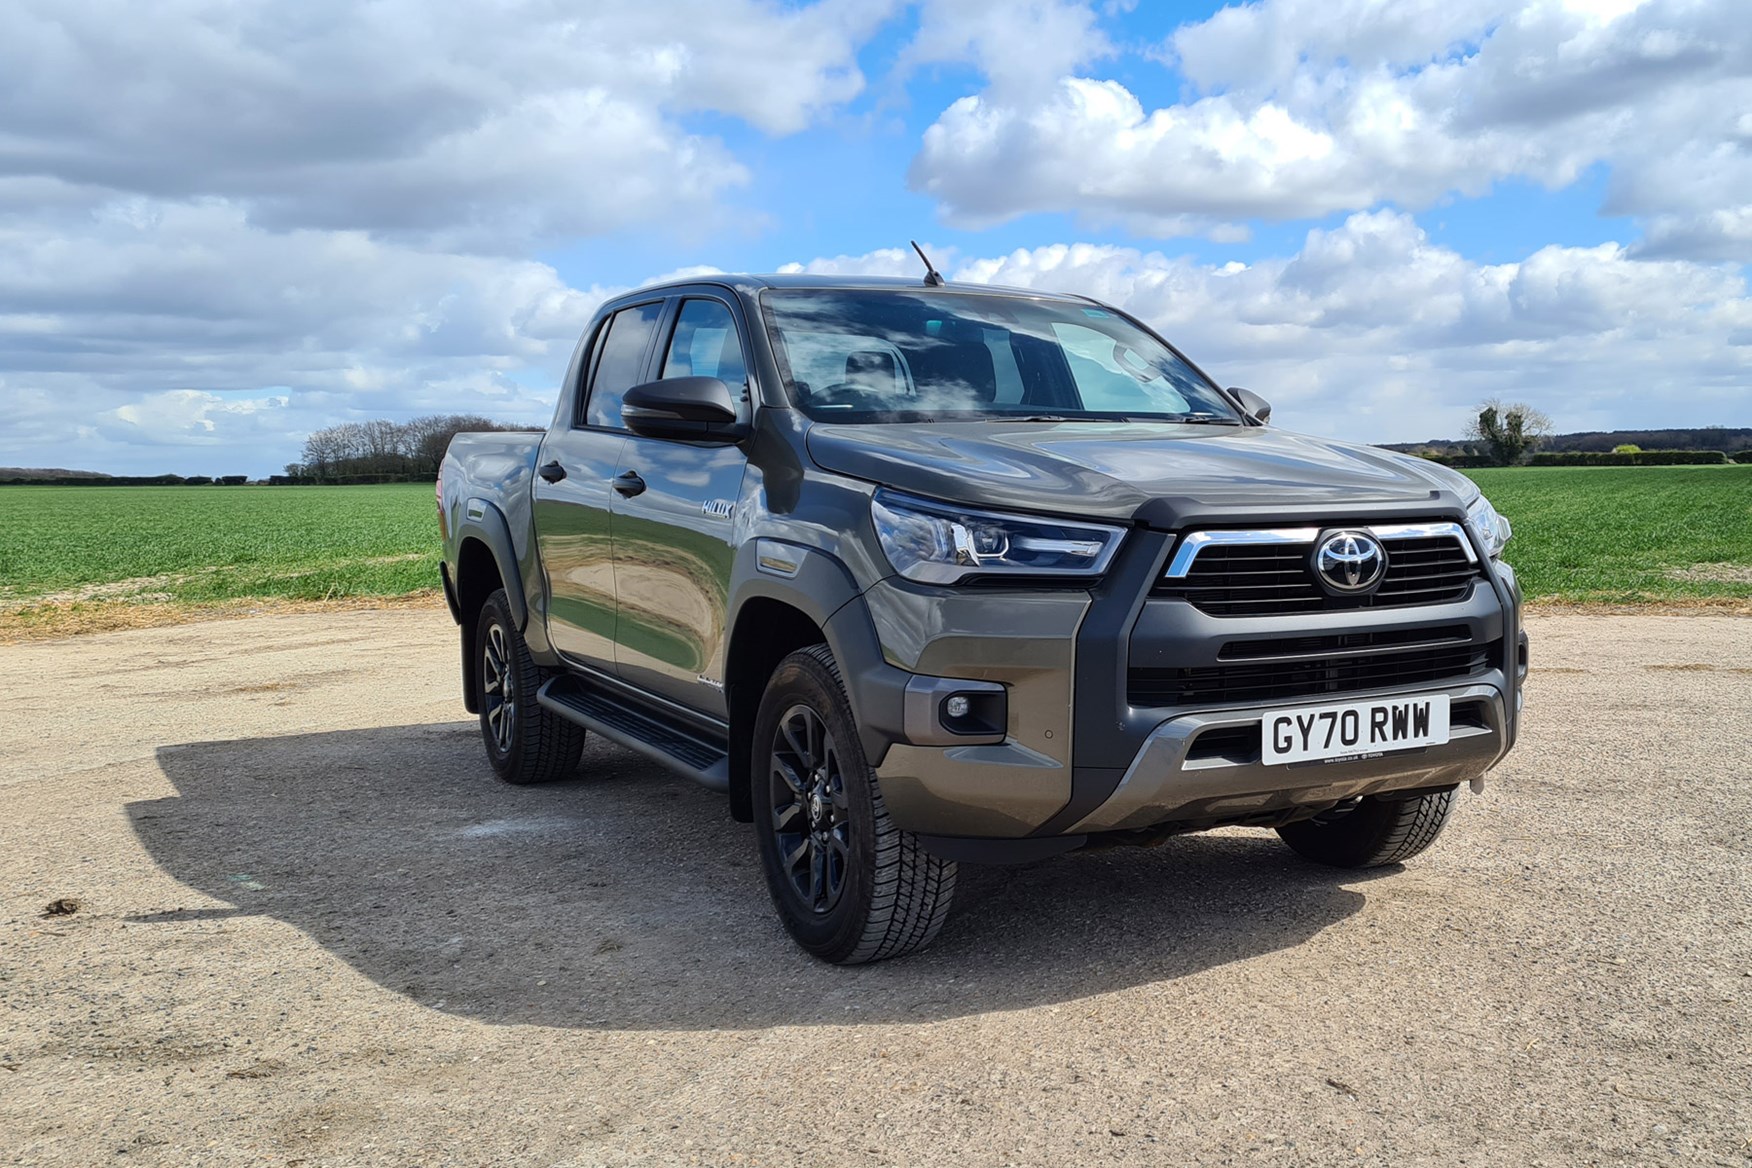 Toyota Hilux Invincible X 2.8D manual review - front, green, unique bumper and other styling details